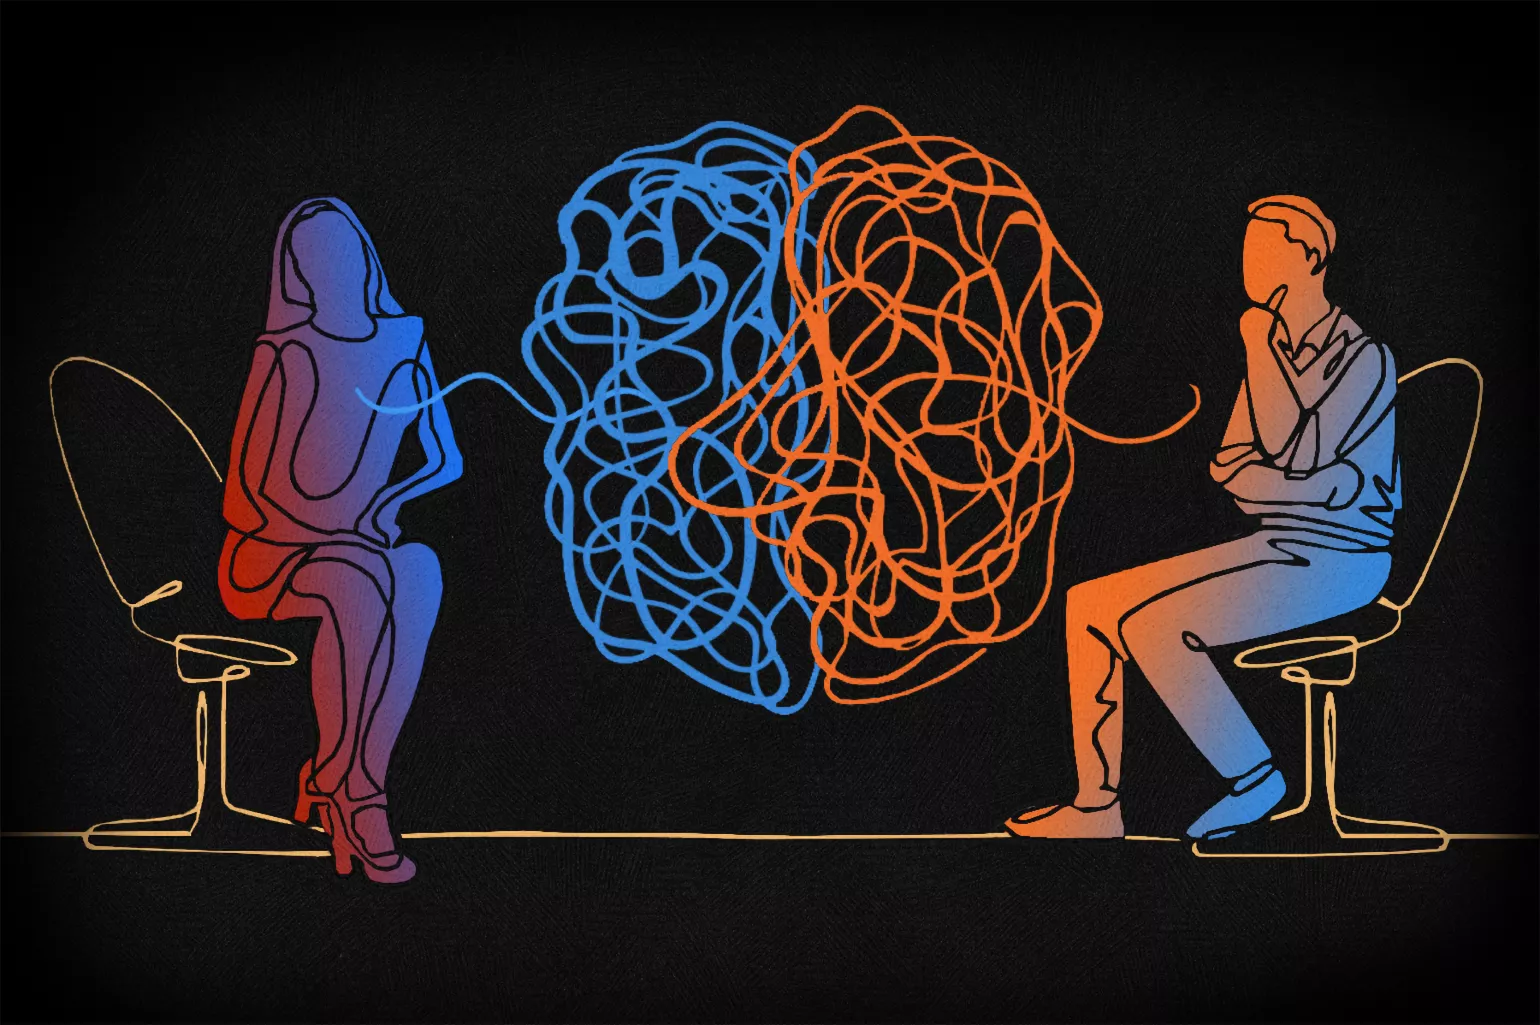 Outline silhouette of a man and woman separated by a brain colored in orange red and blue against a black background 